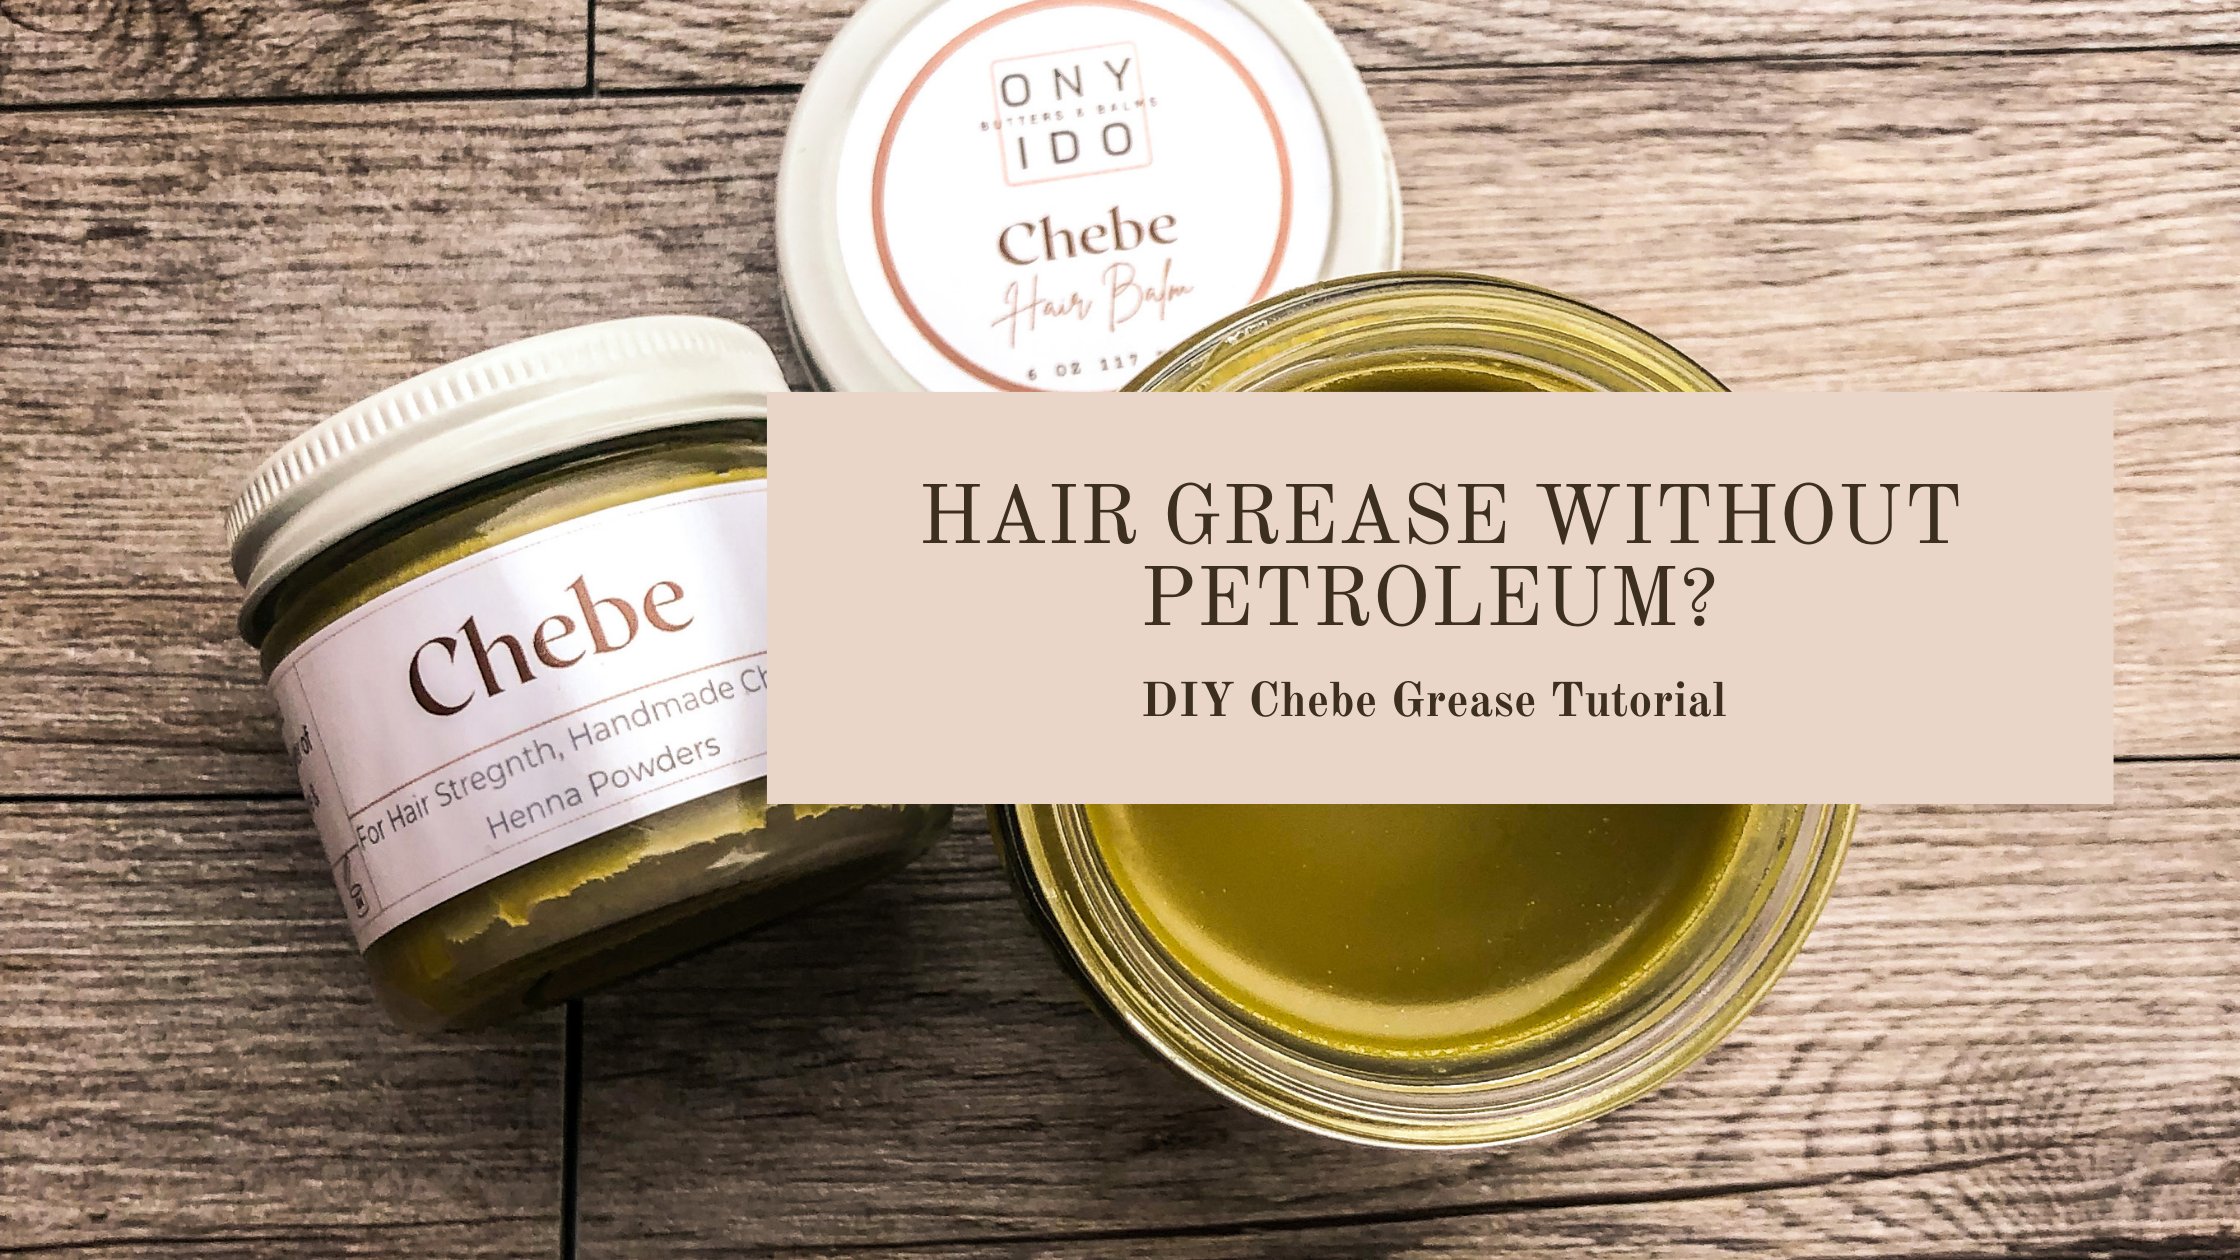 Hair Grease without Petroleum? – Onyido